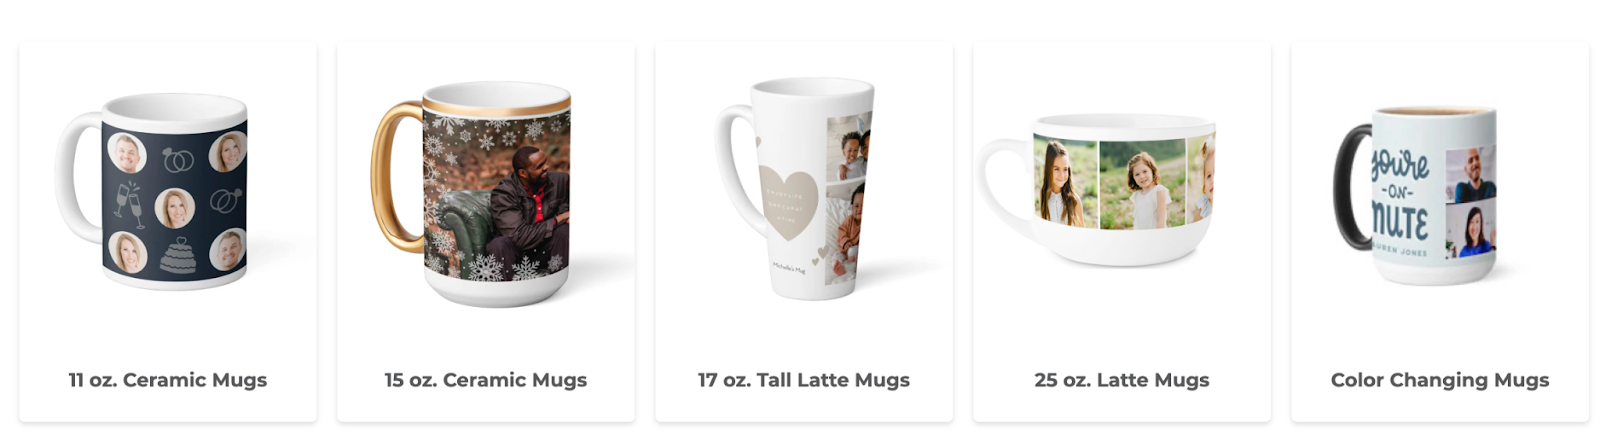 personalized marketing examples, Shutterfly picture of two mugs